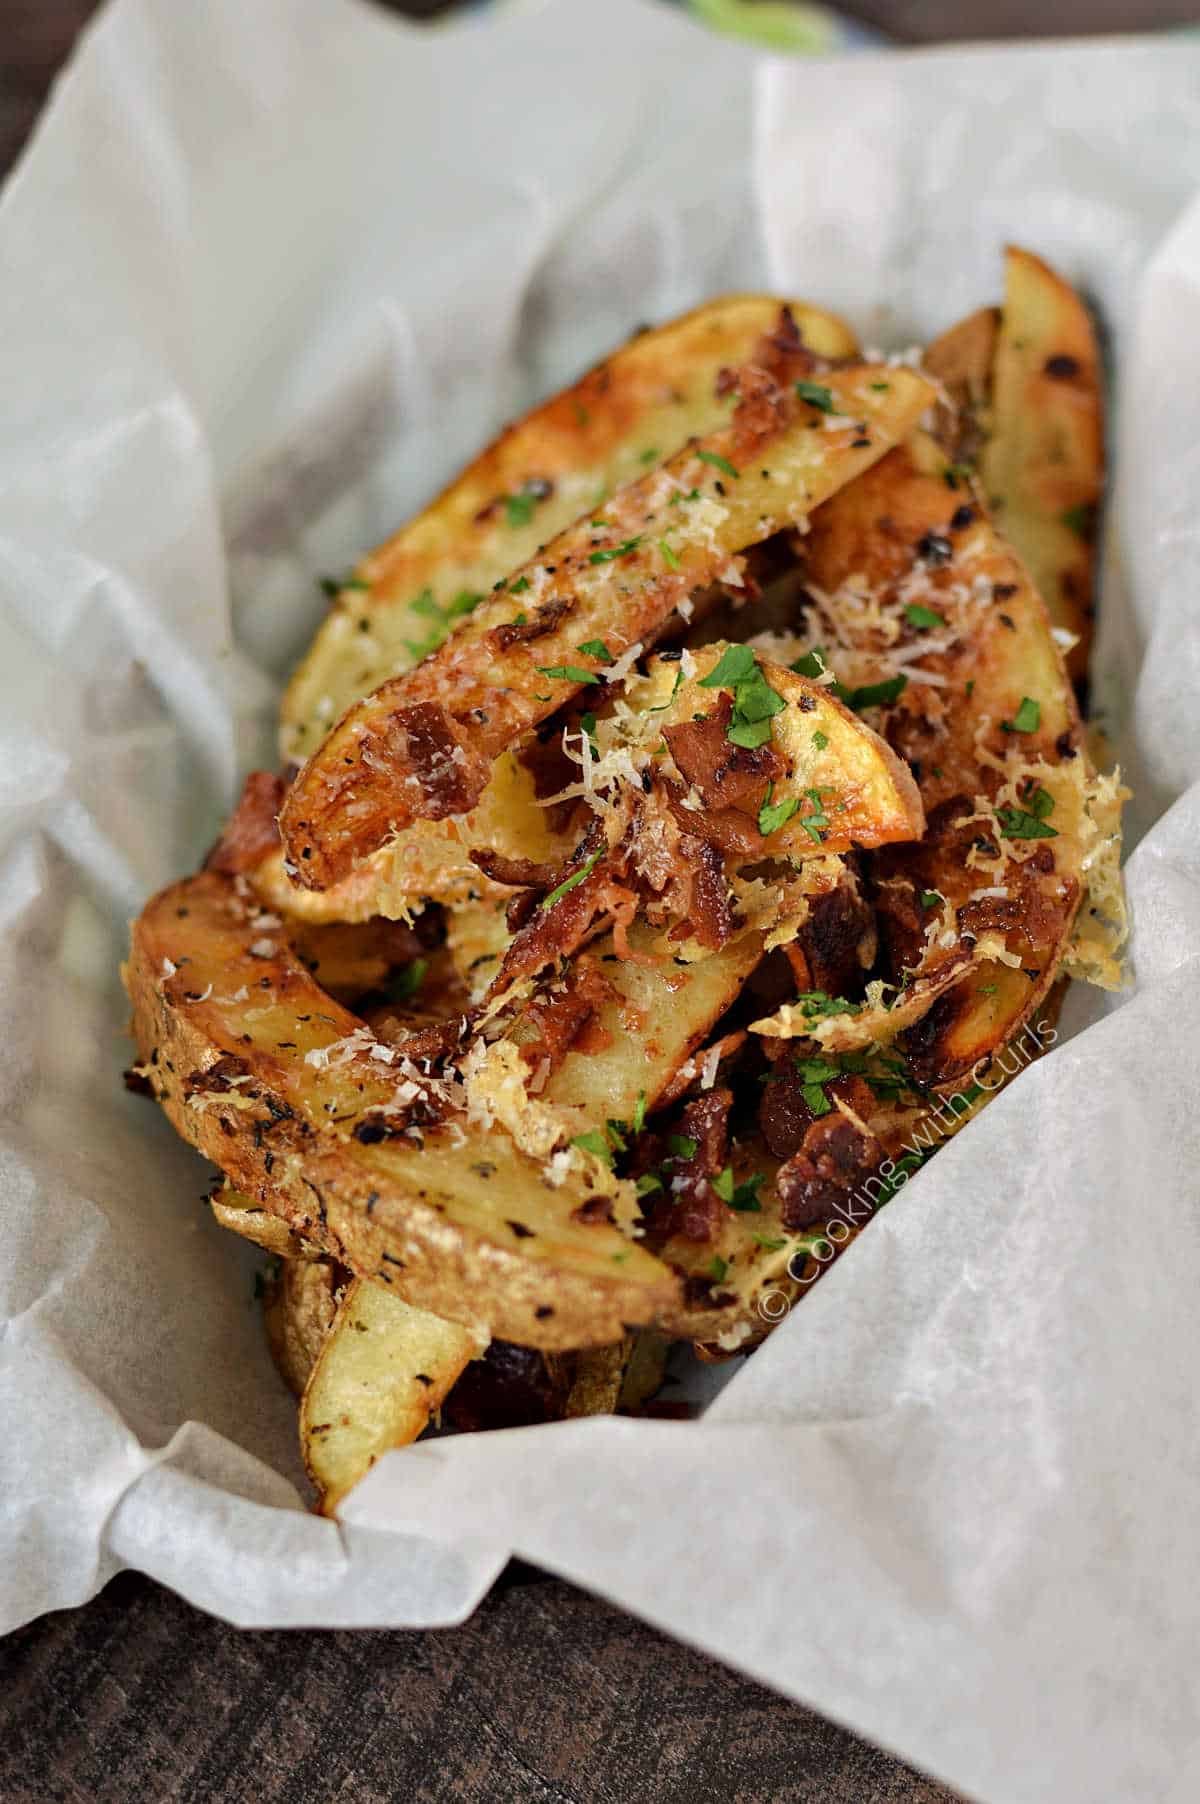 Baked potato wedges topped with Parmesan cheese, bacon, and herbs in a parchment lined basket.